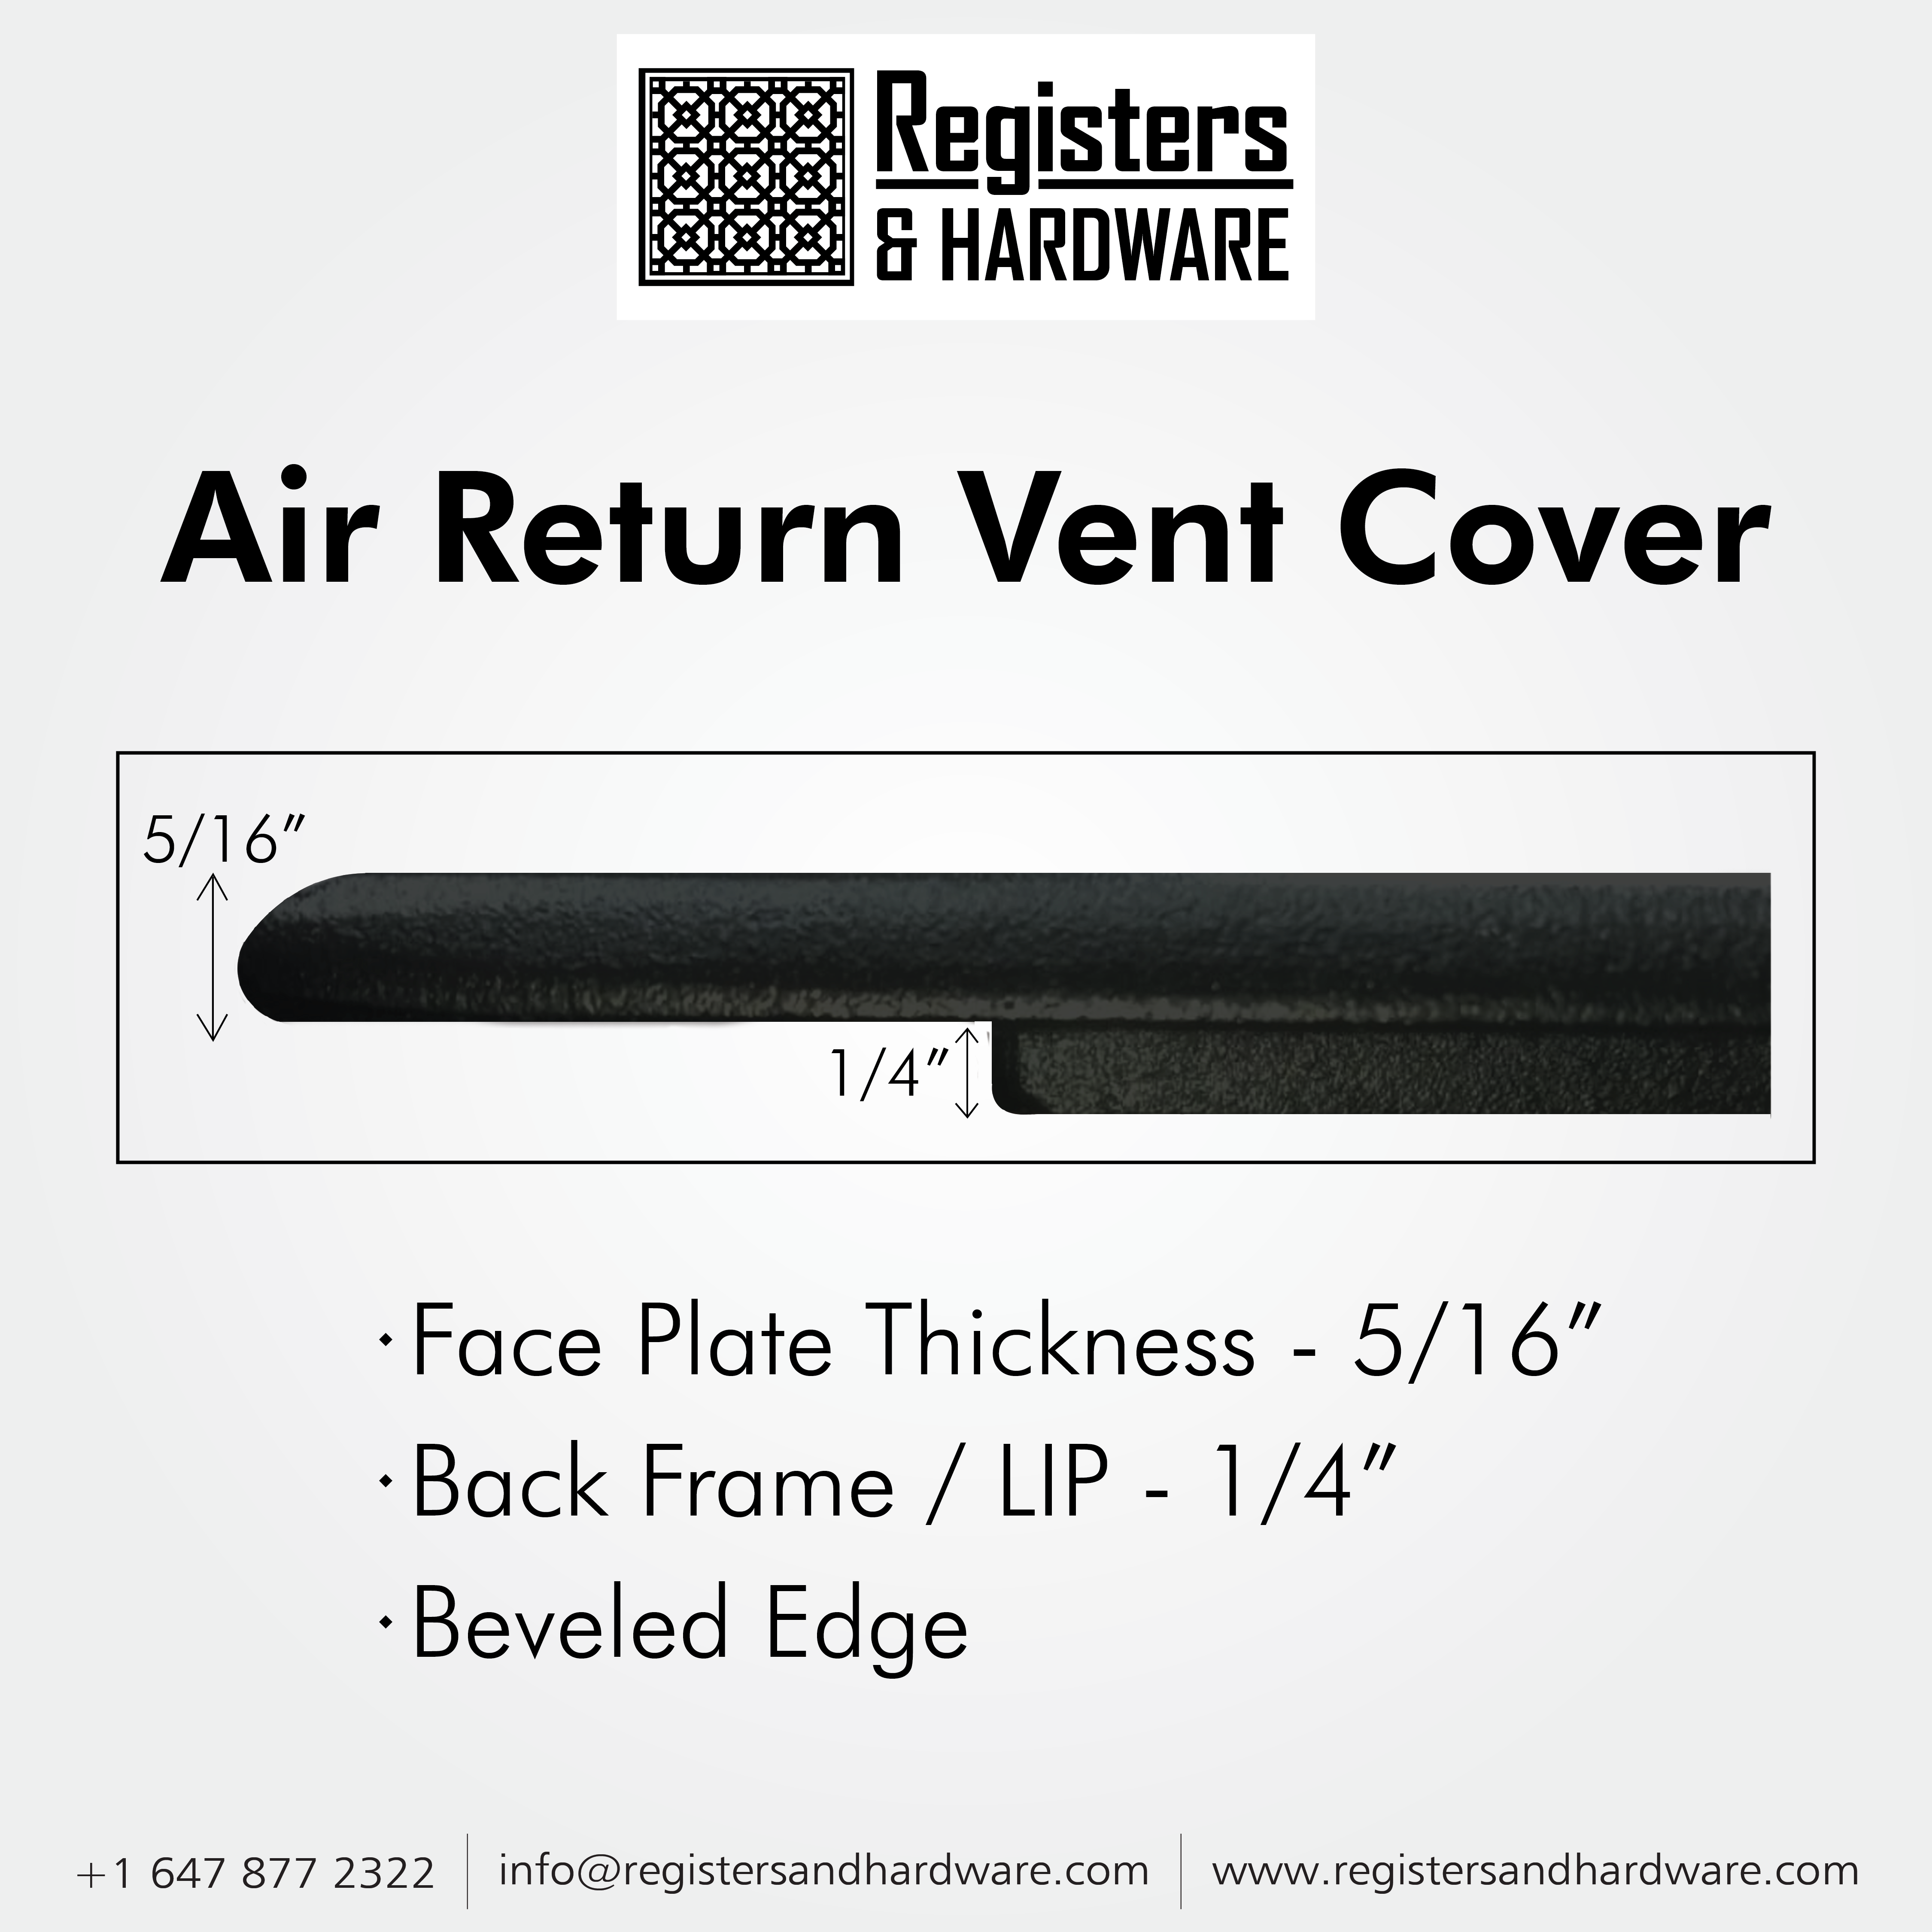 Achtek AIR RETURN 6"x22" Duct Opening (Overall Size 8"x24") | Heavy Cast Aluminum Air Grille HVAC Duct || Powder Coated